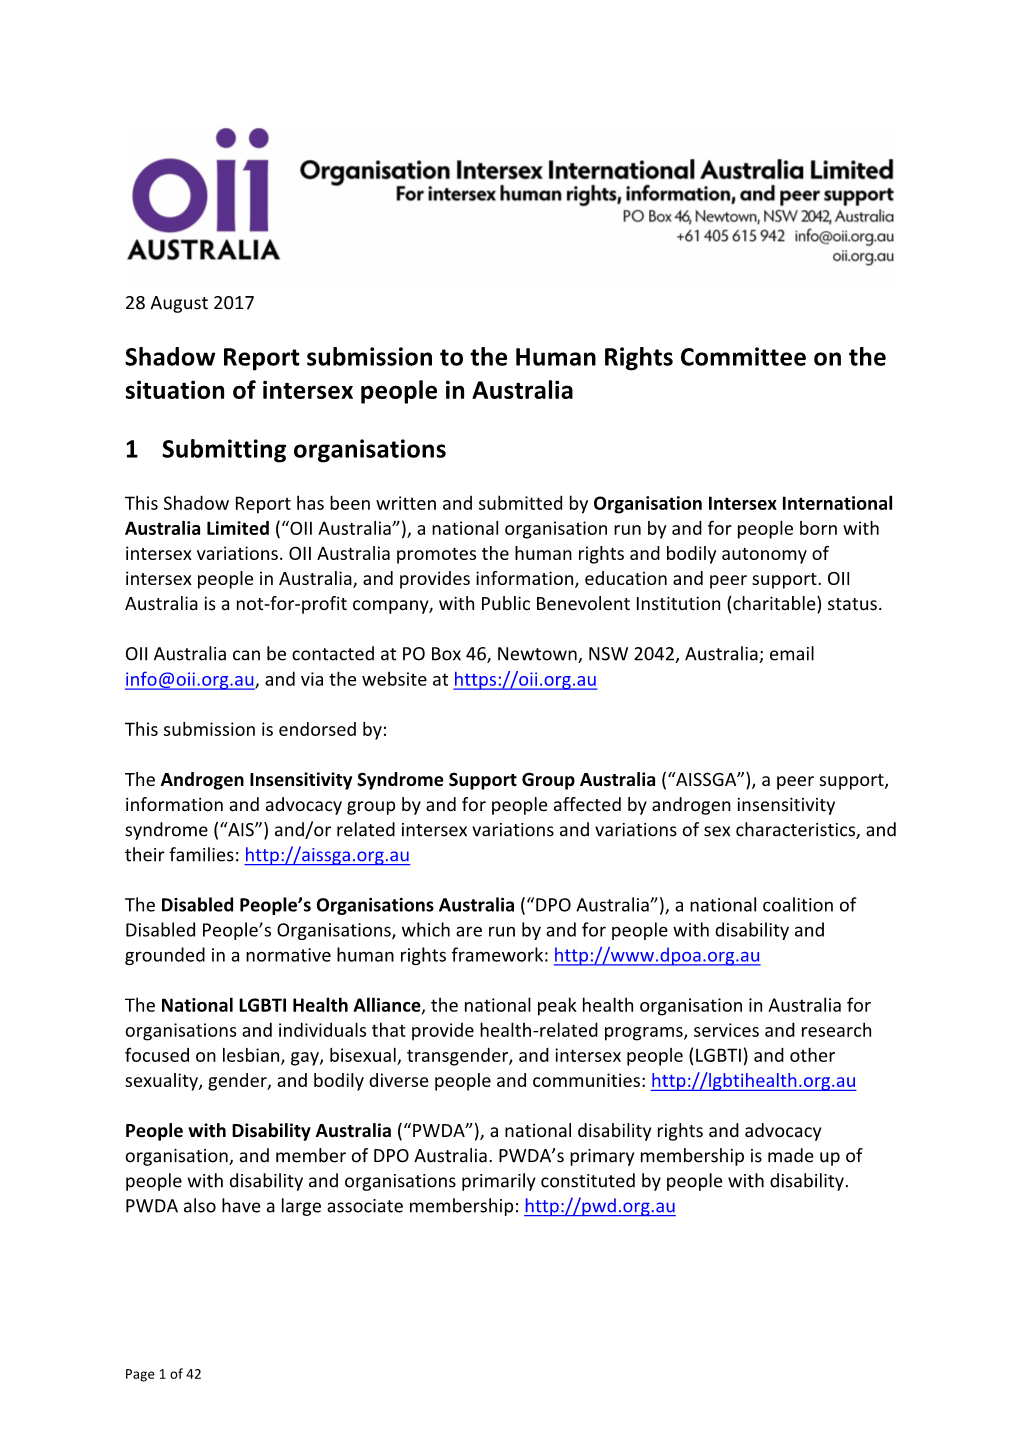 Shadow Report Submission to the Human Rights Committee on the Situation of Intersex People in Australia